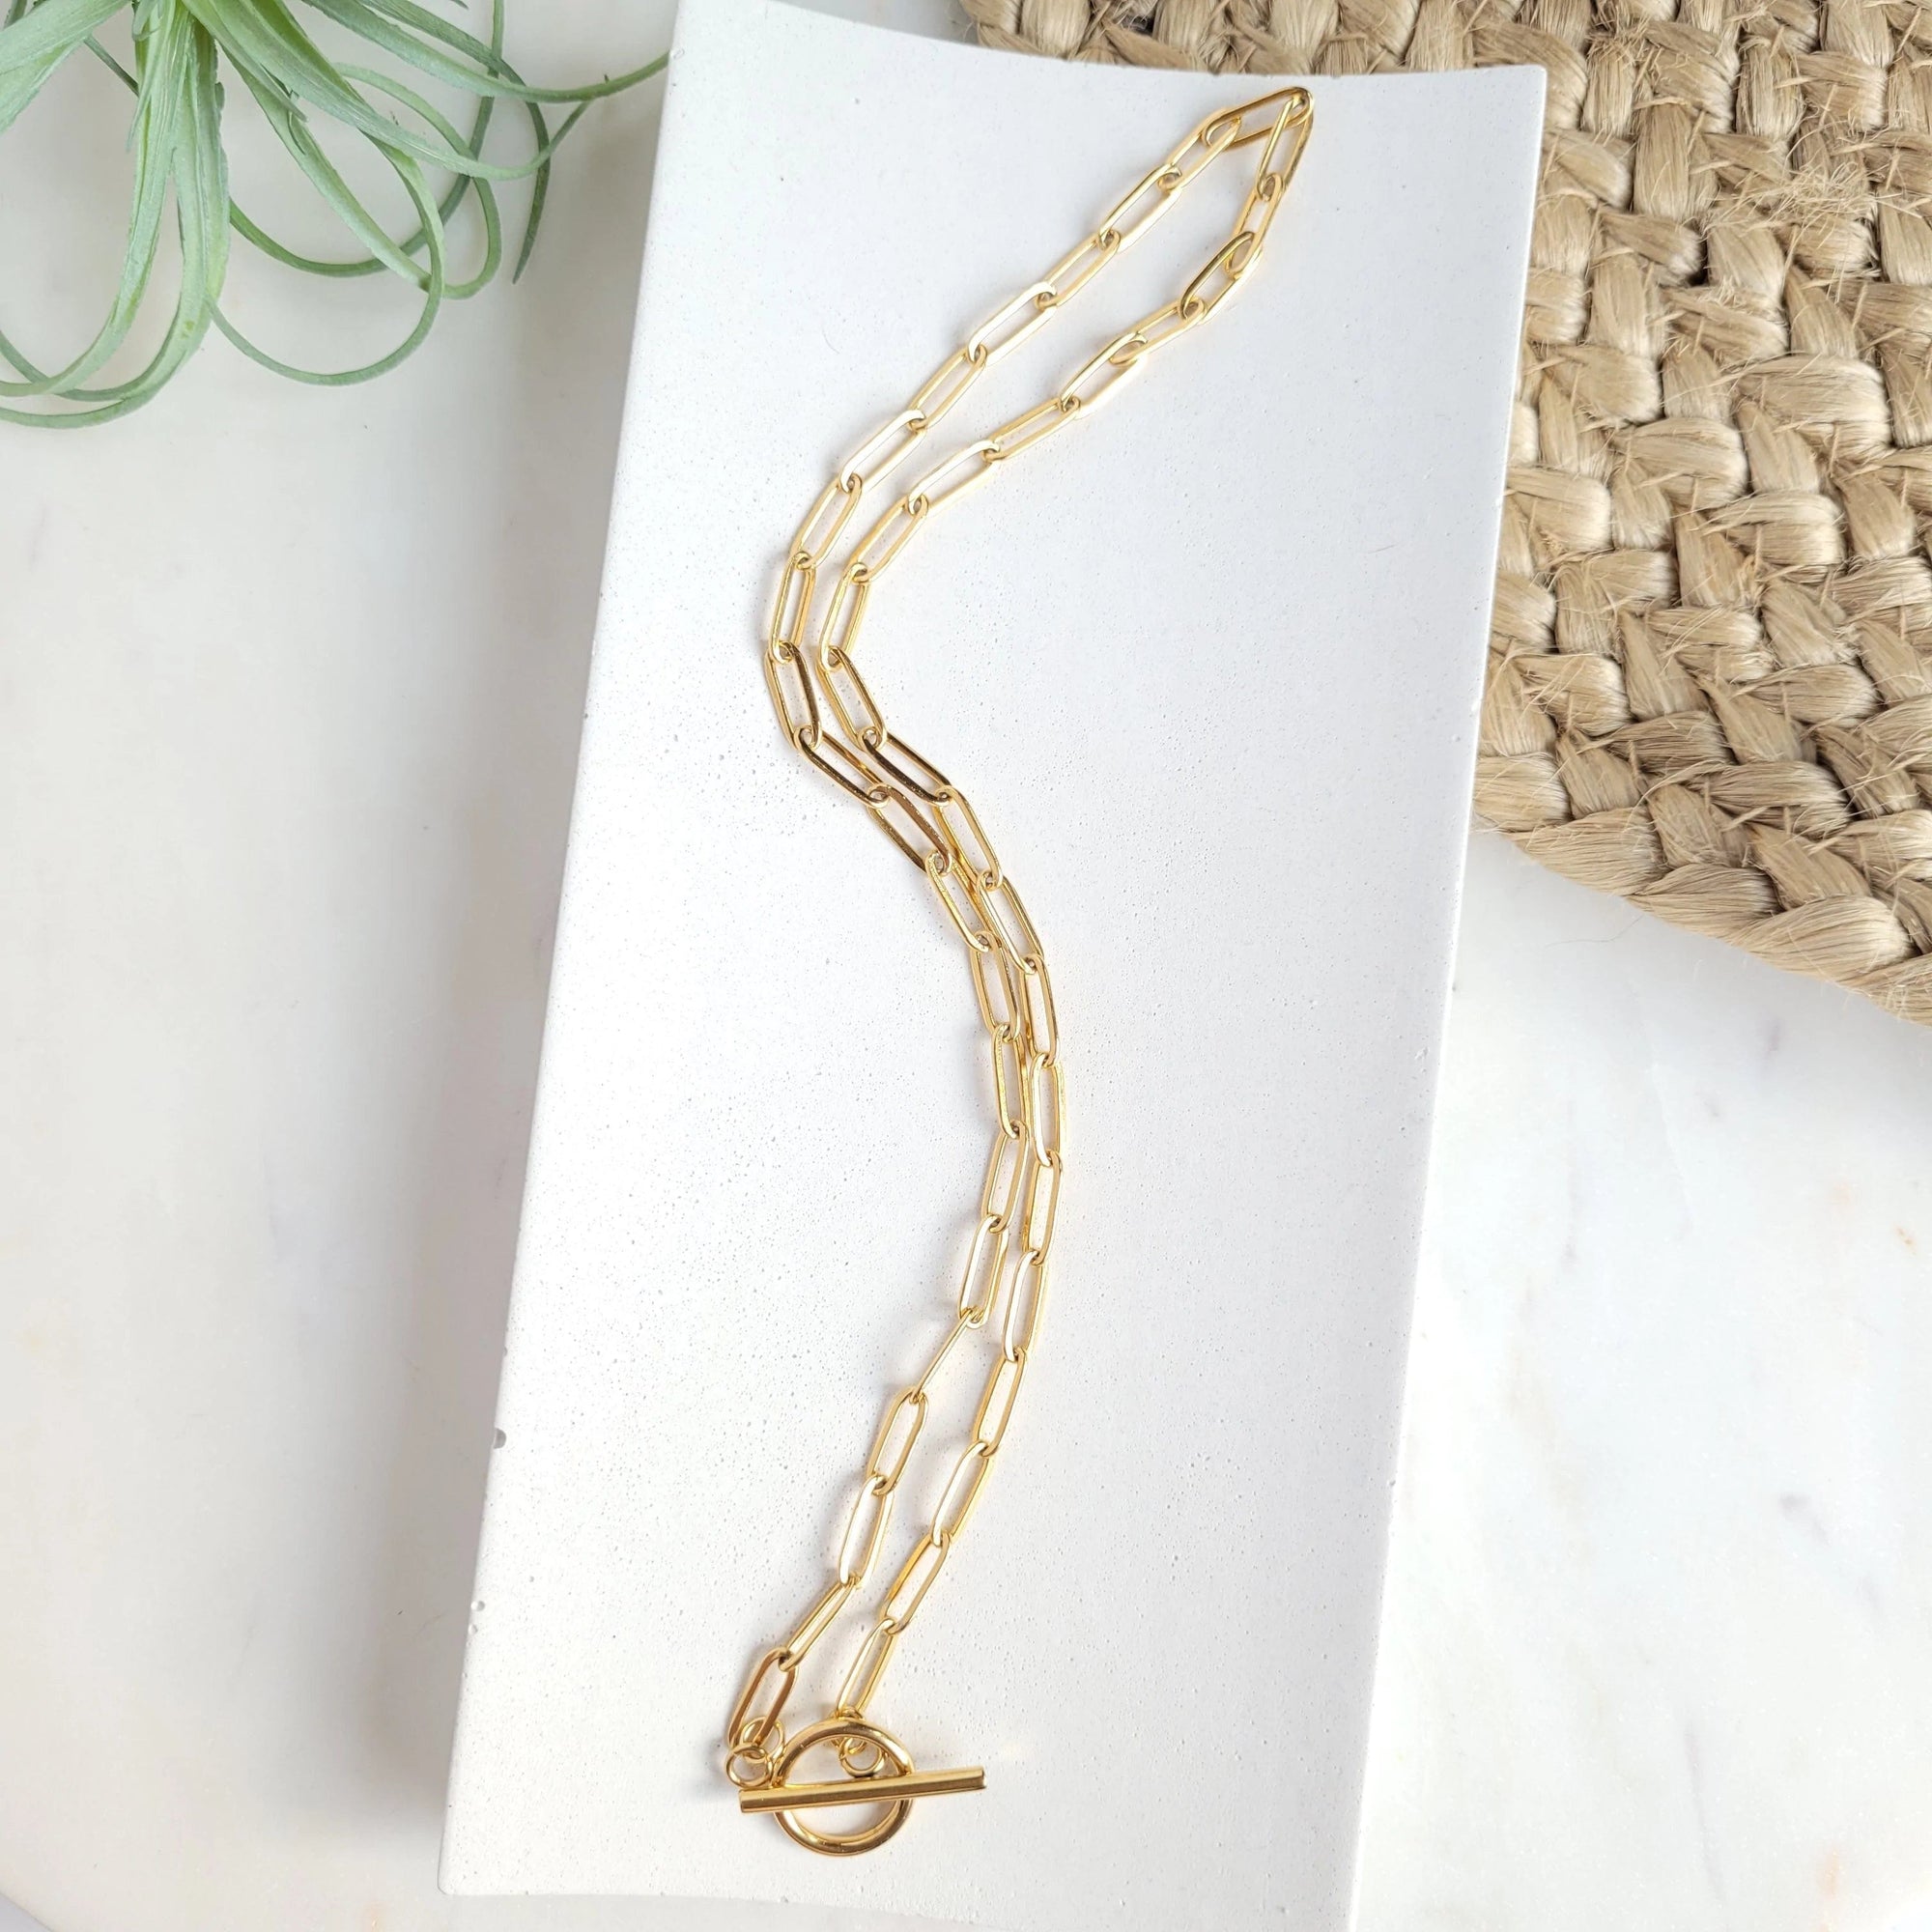 Spiffy & Splendid Jewelry Gold / 16 inch 18k Gold Plated Paper Clip Chain with Toggle Clasp